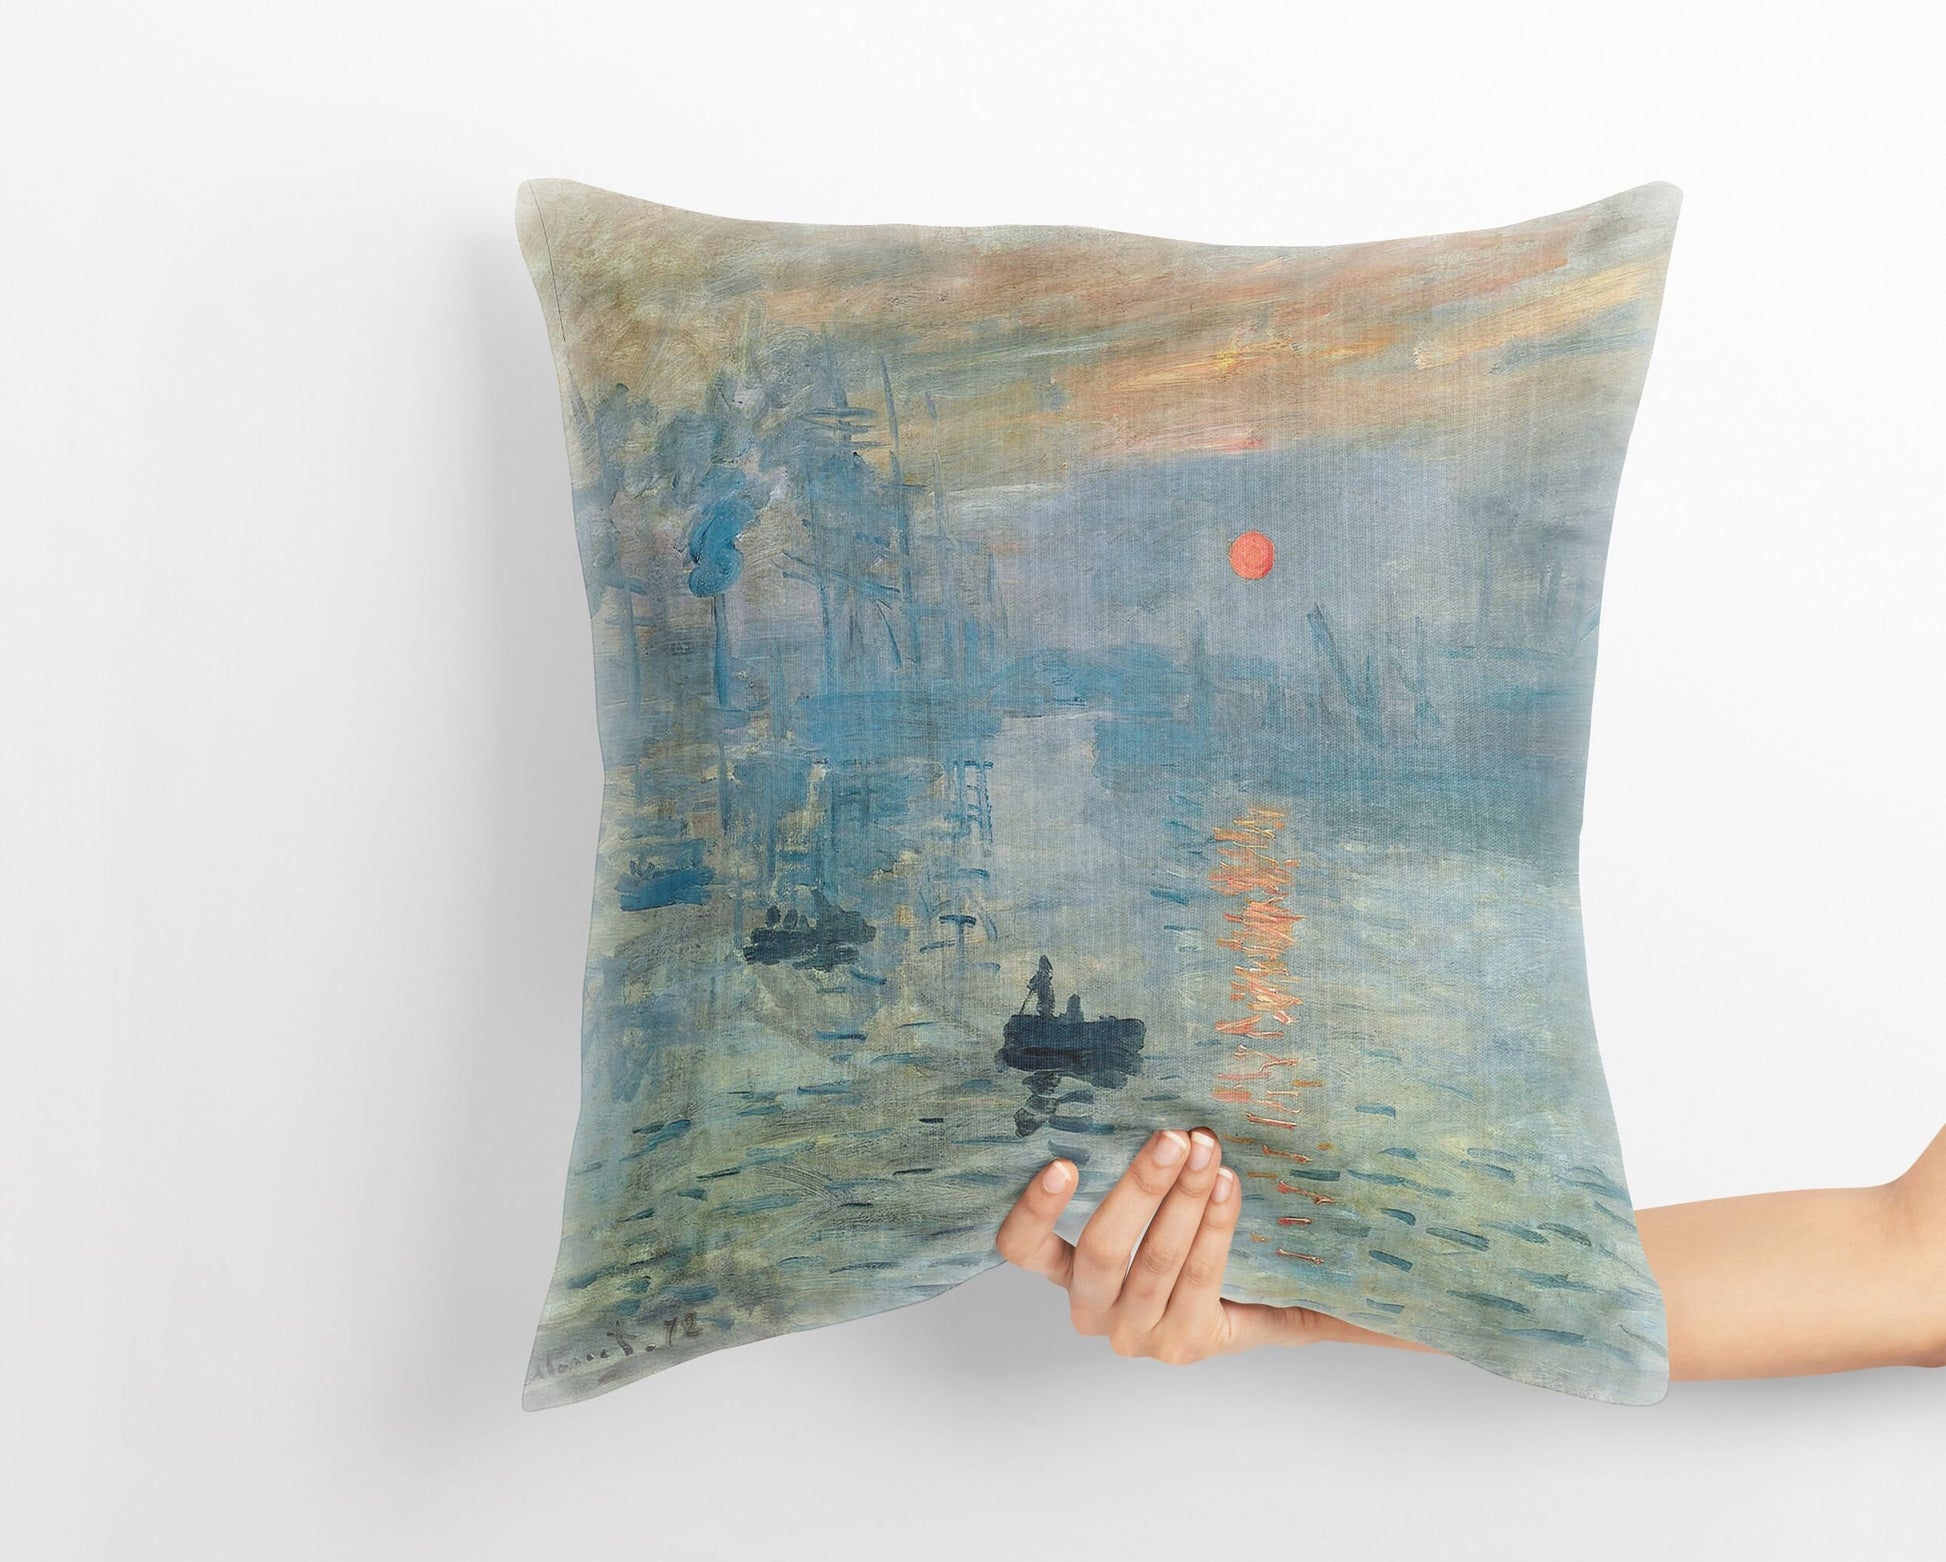 Claude Monet Famous Painting Impression Sunrise, Throw Pillow Cover, Abstract Pillow, Soft Pillow Cases, Blue And Green, Modern Pillow